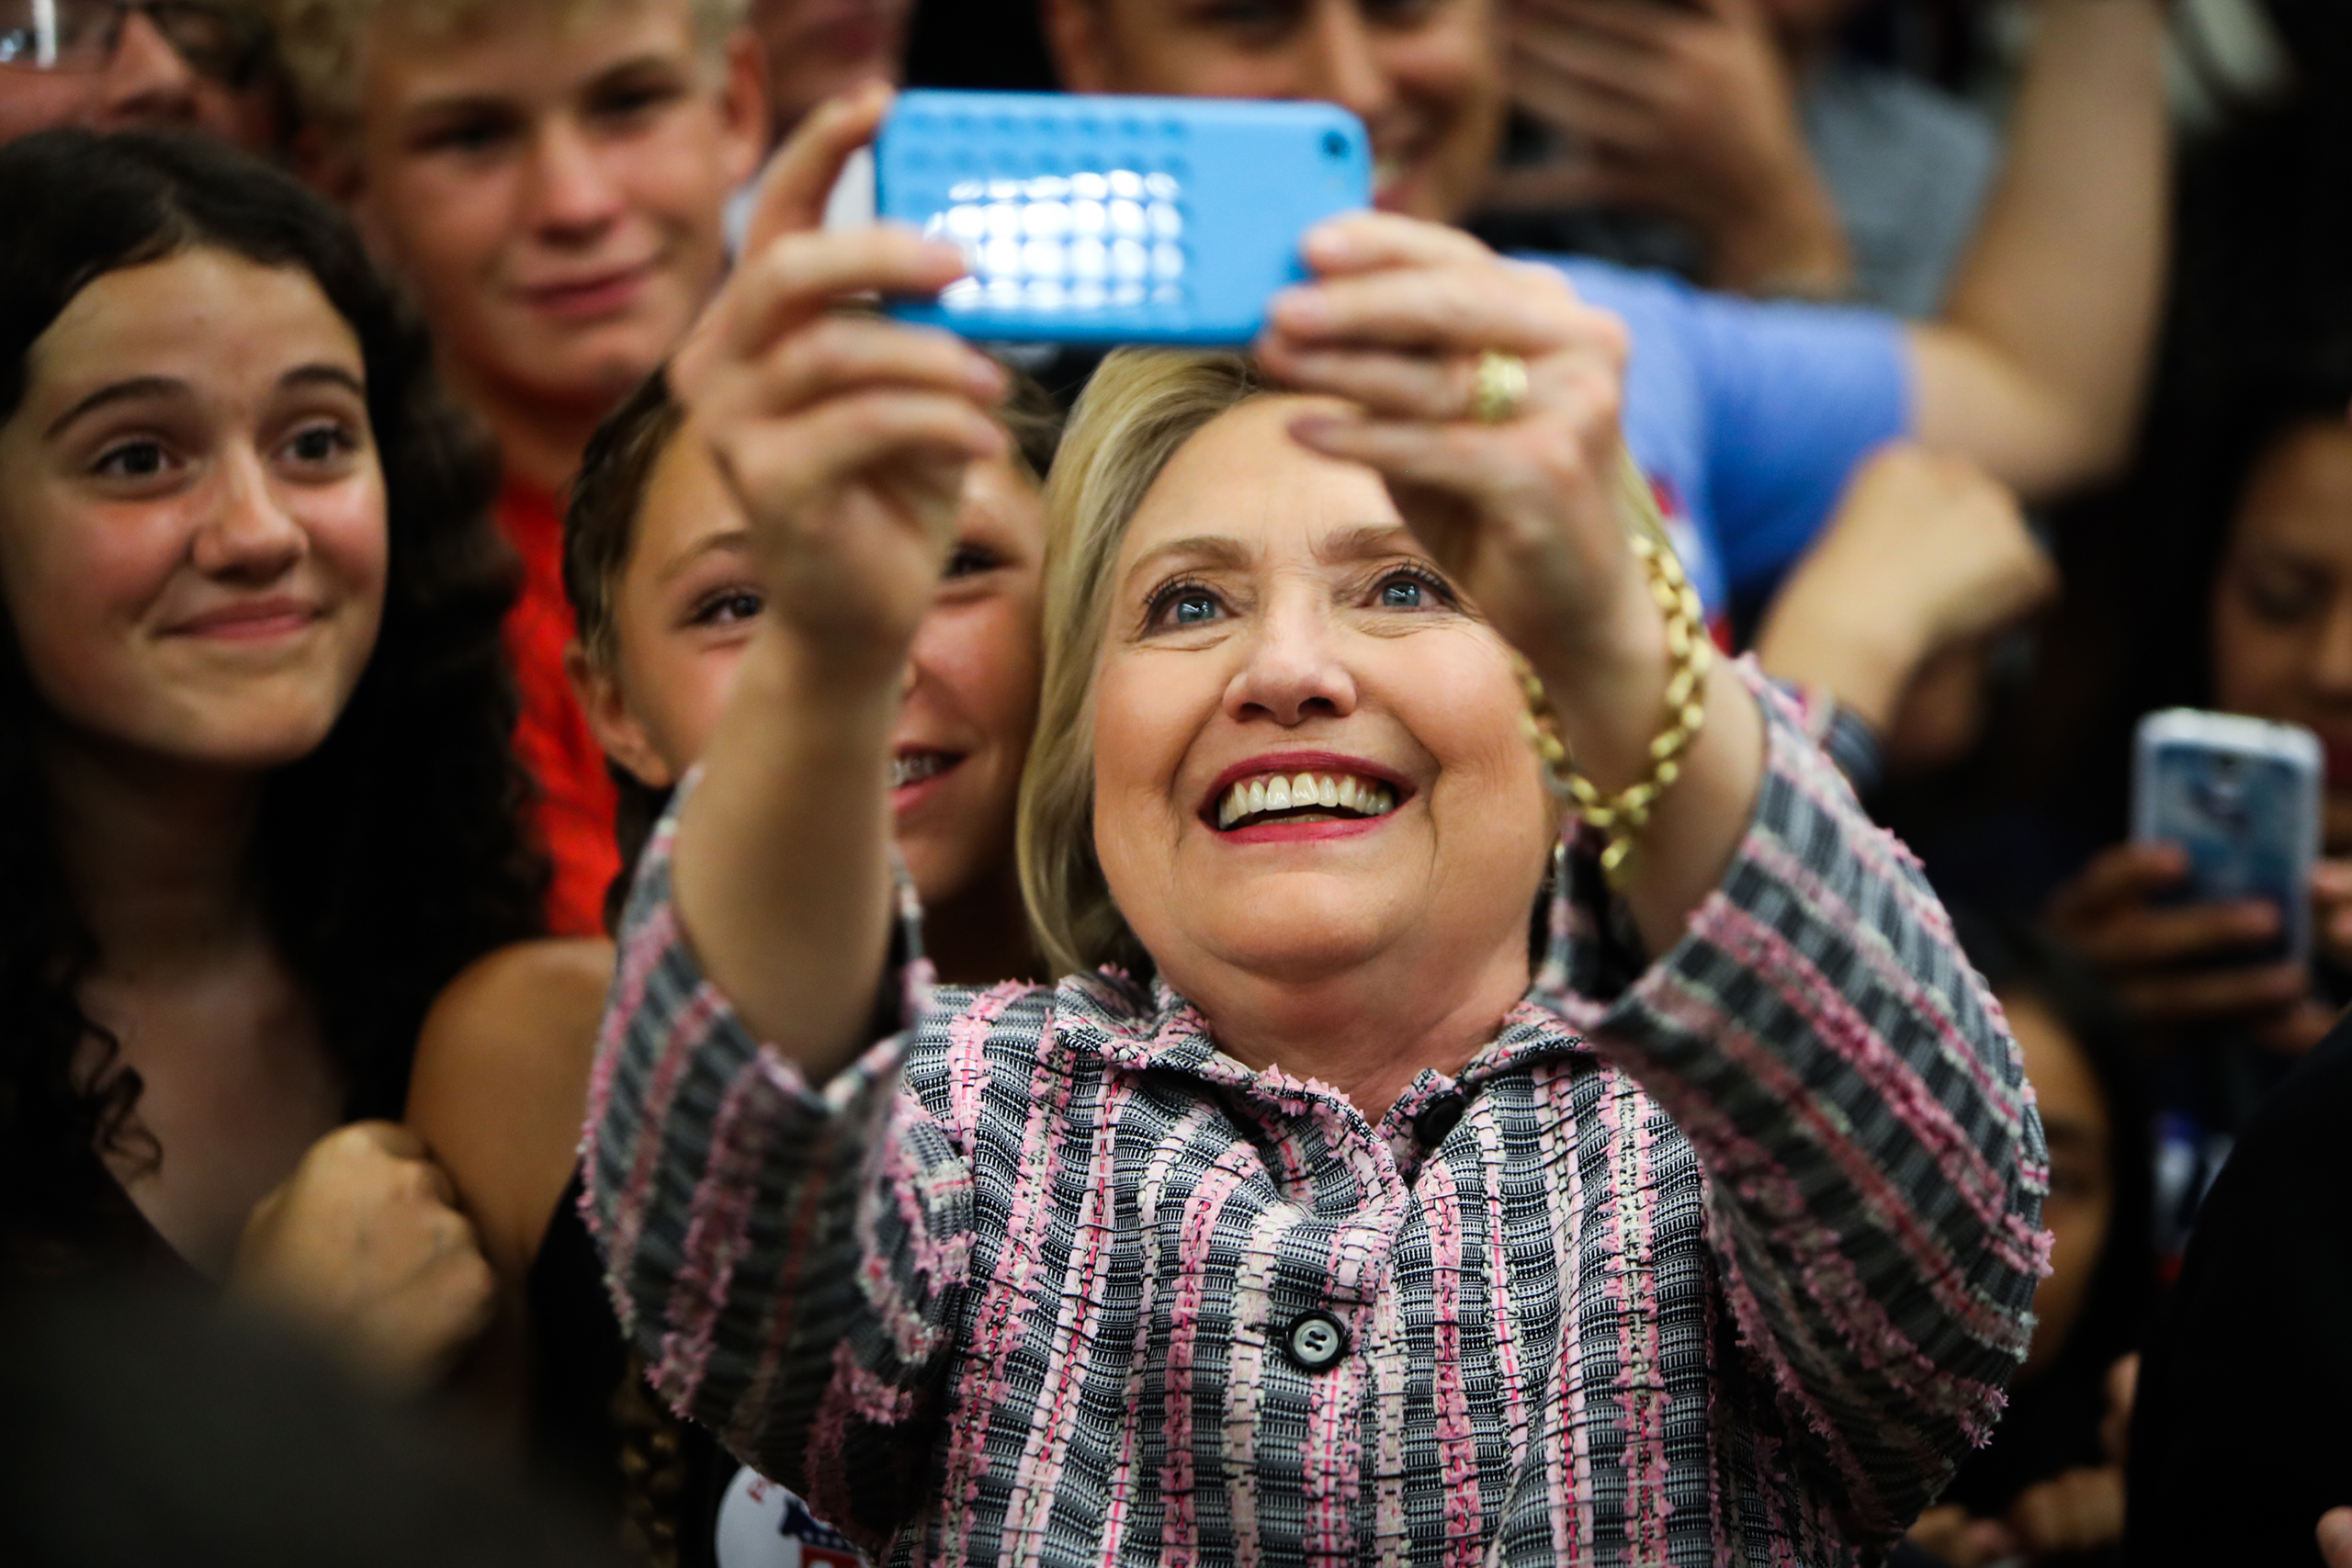 Hillary Clinton takes photographs with supporters after a campaign rally at Sacramento City College in Calif. on June 5, 2016. (Gabrielle Lurie—AFP/Getty Images)